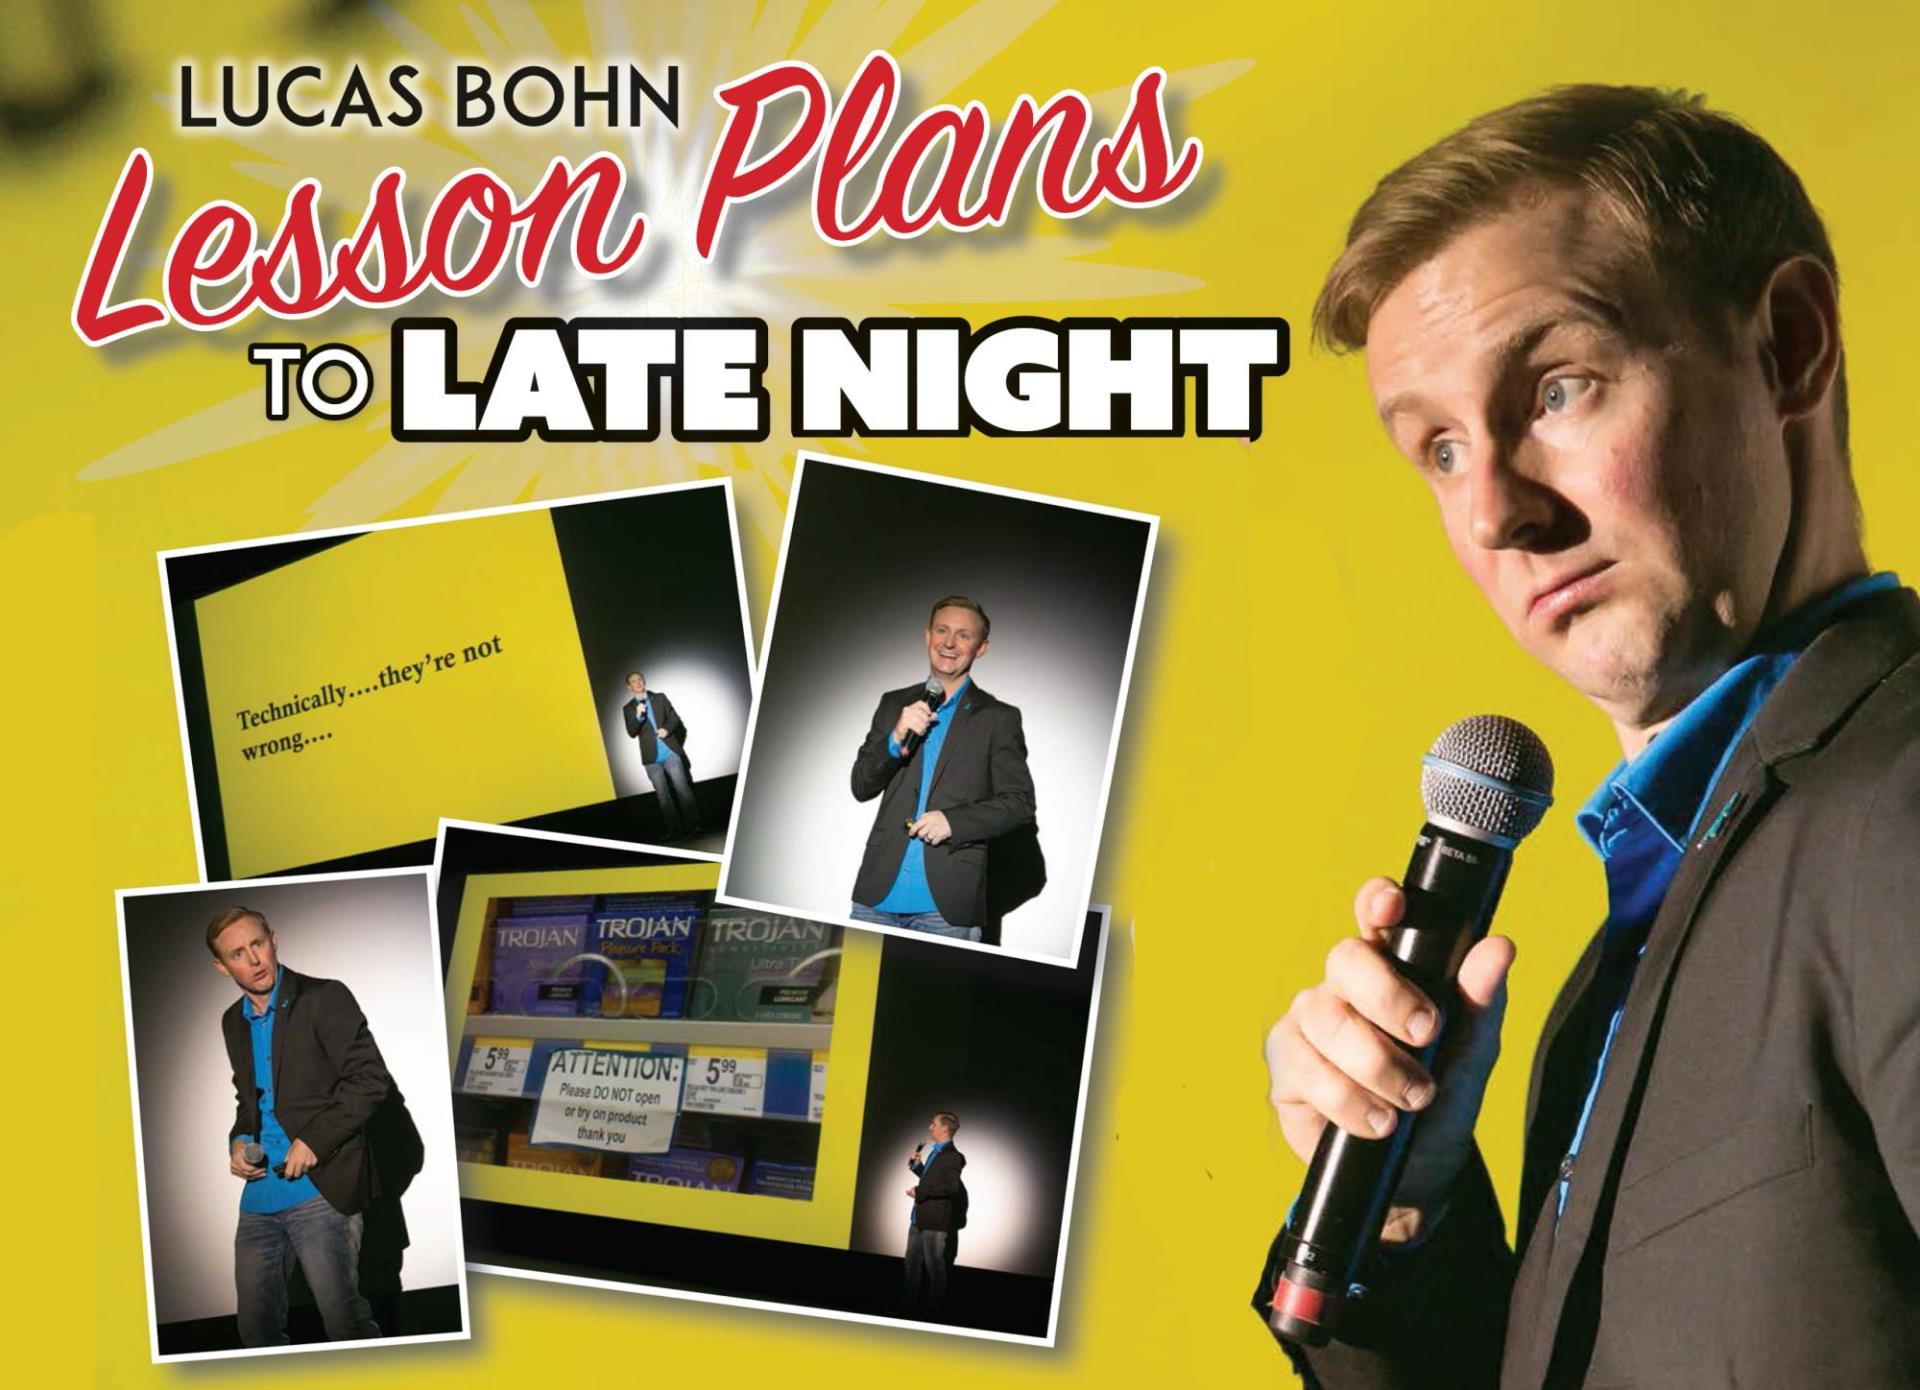 Lesson-Plans-to-Late-Night-Promo-crop